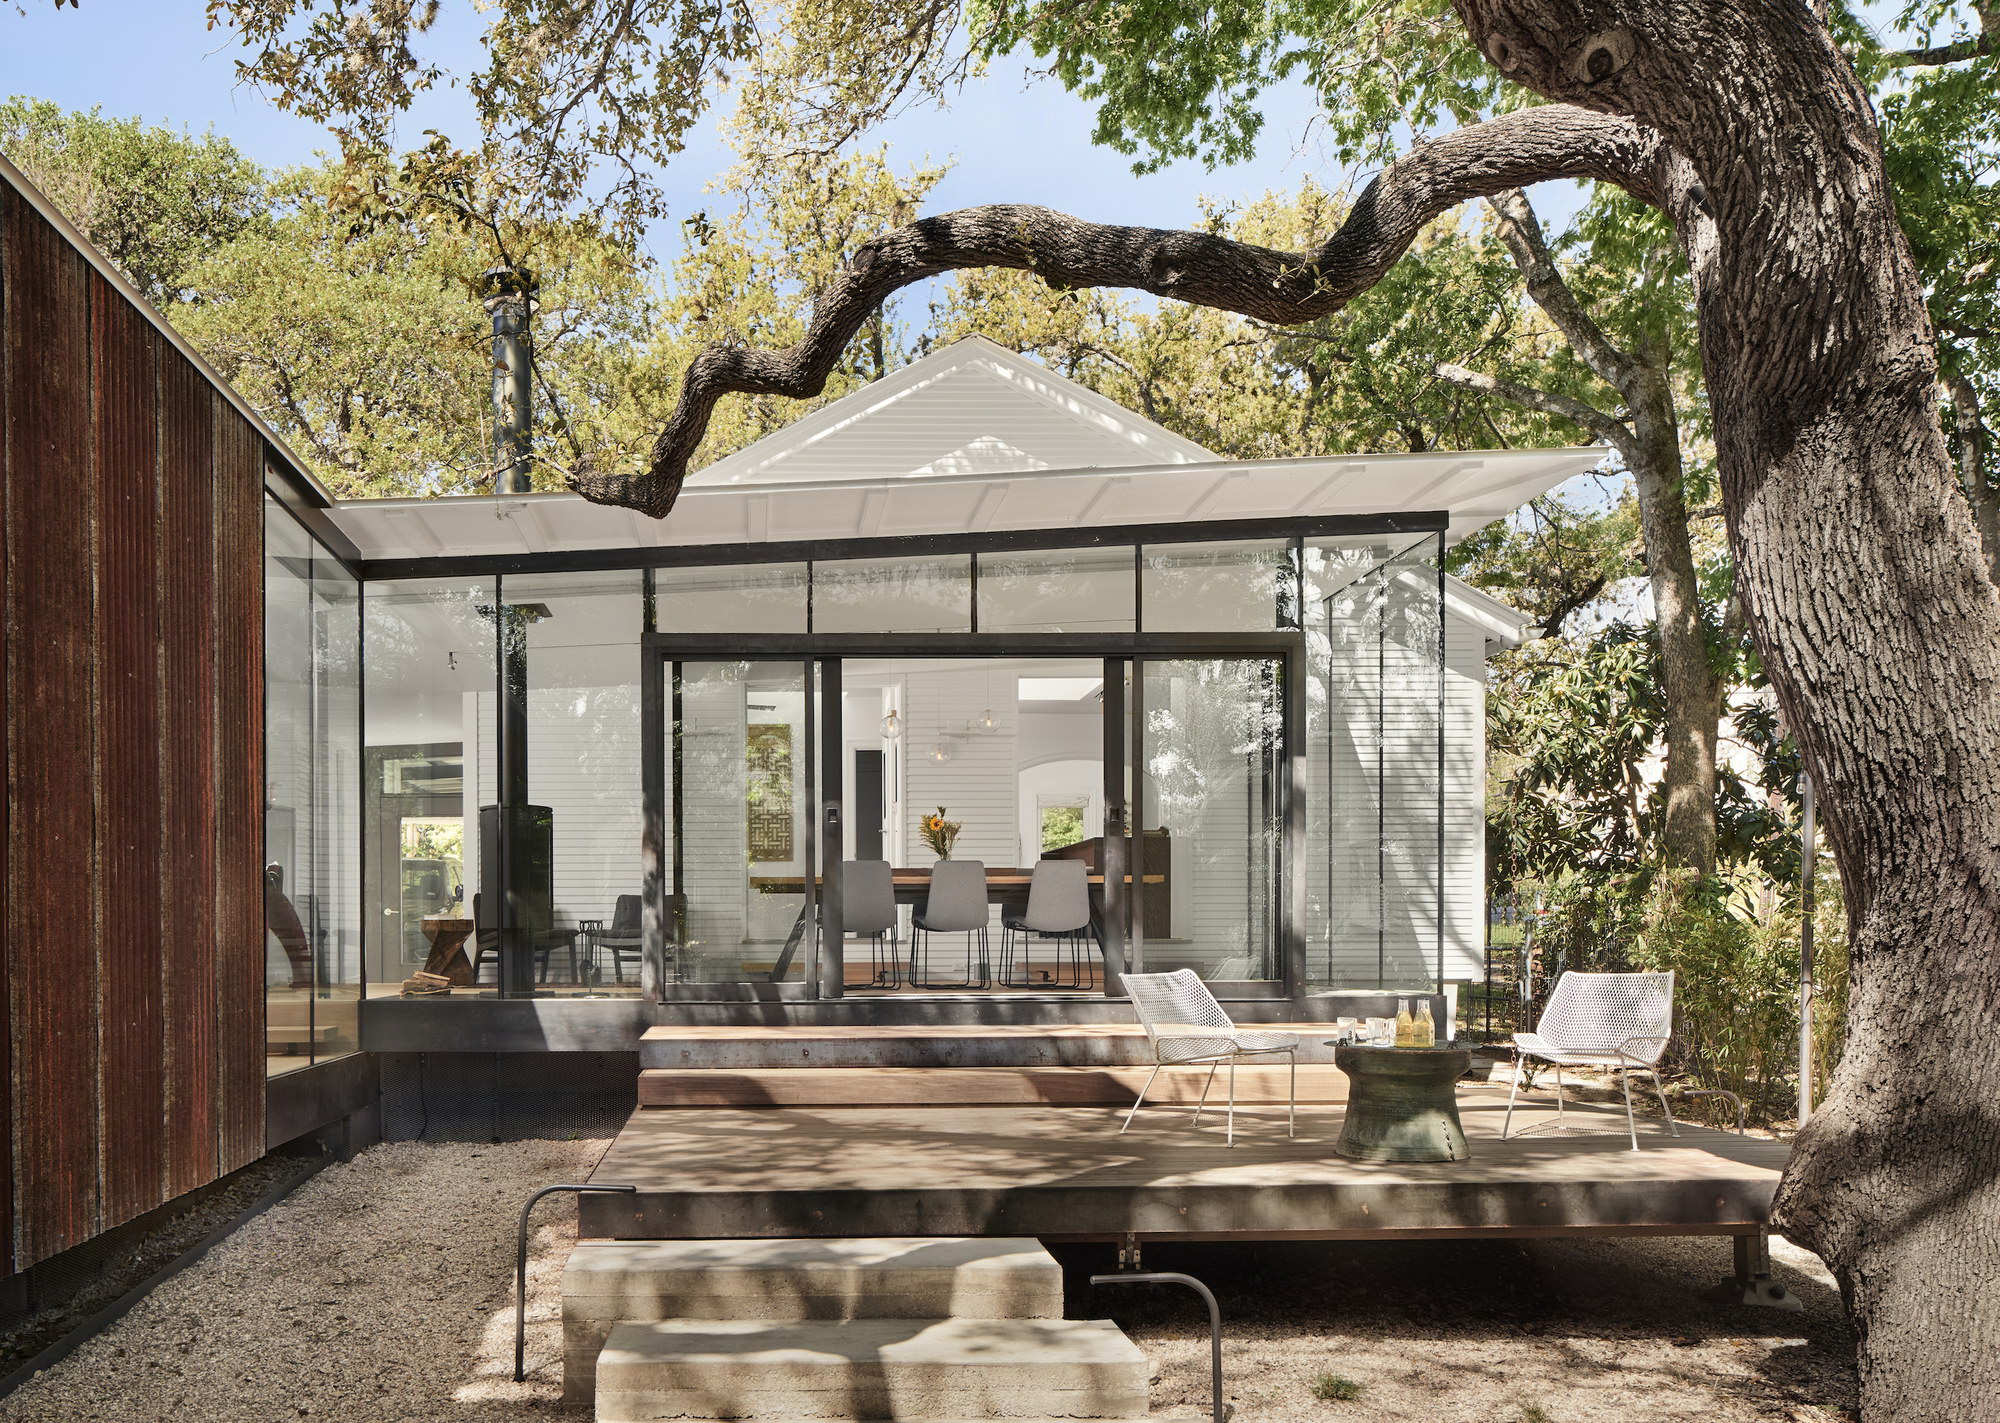 LeanToo – Corrugated Metal Addition to an Austin Cottage